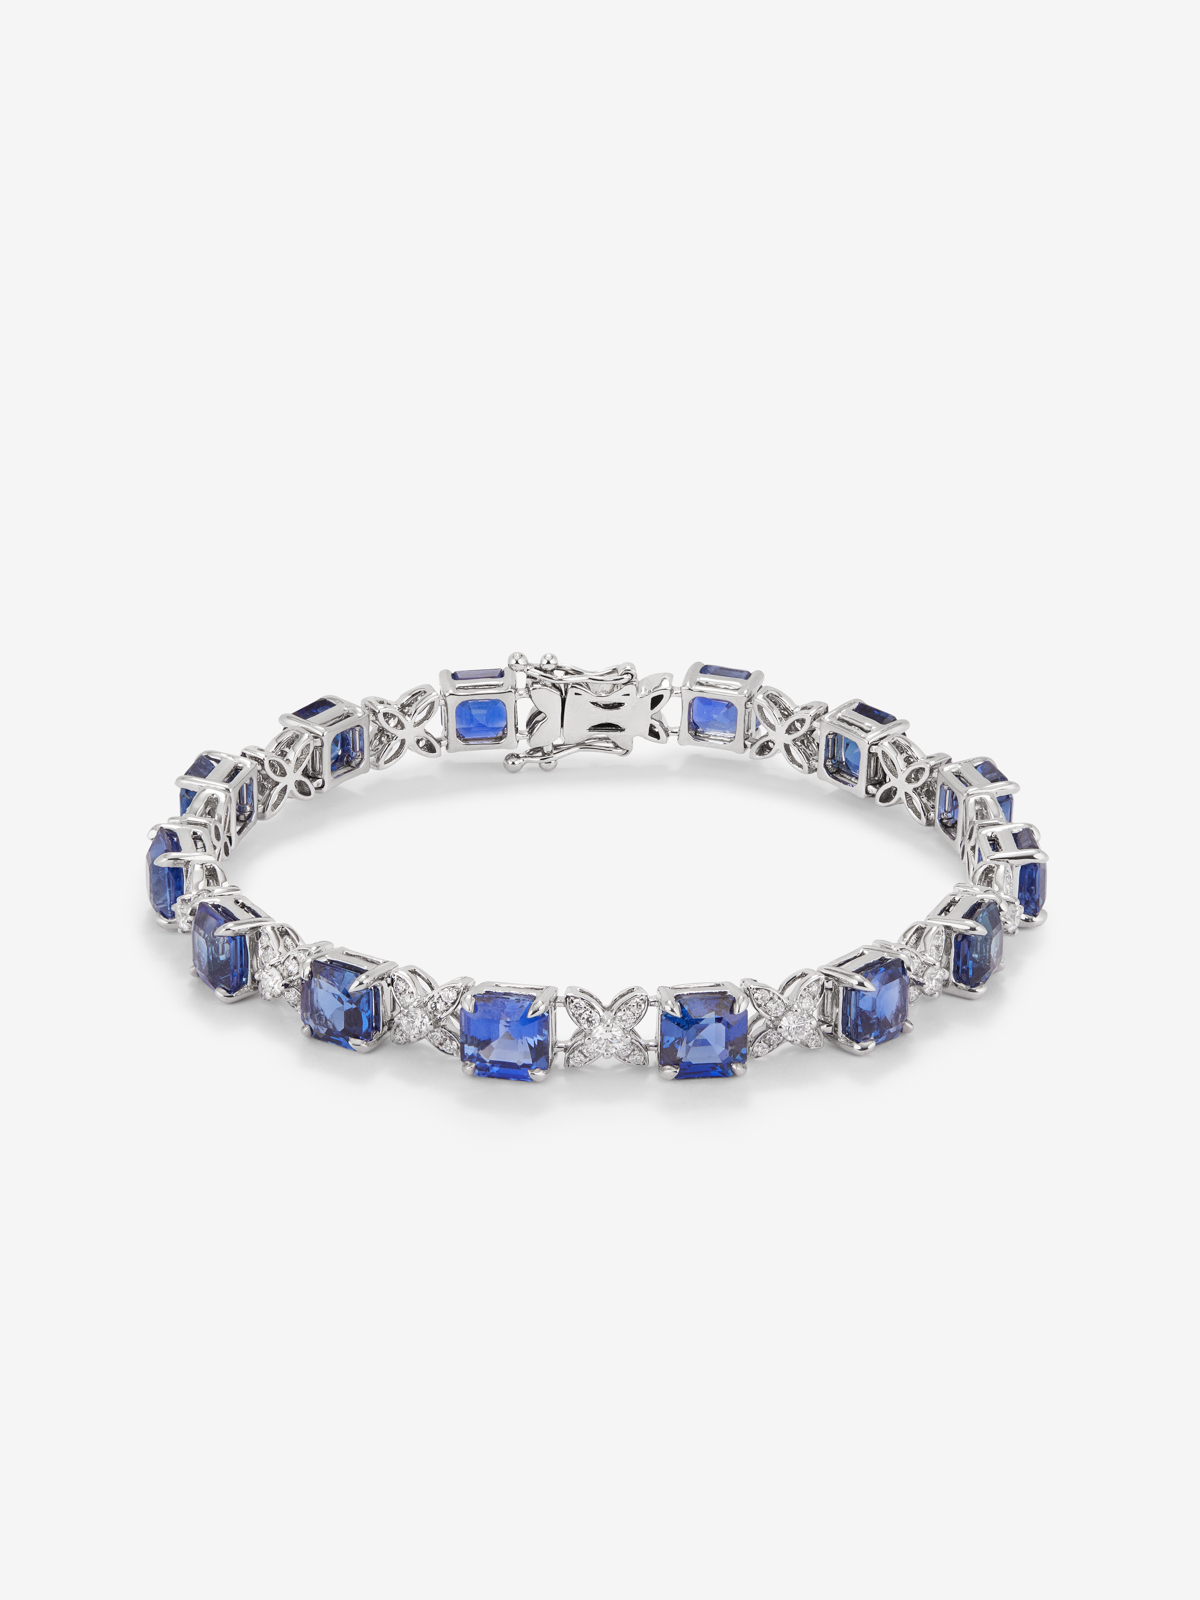 18K white gold bracelet with blue sapphiros in octagonal size of 16.86 cts and white diamonds in 1.32 cts